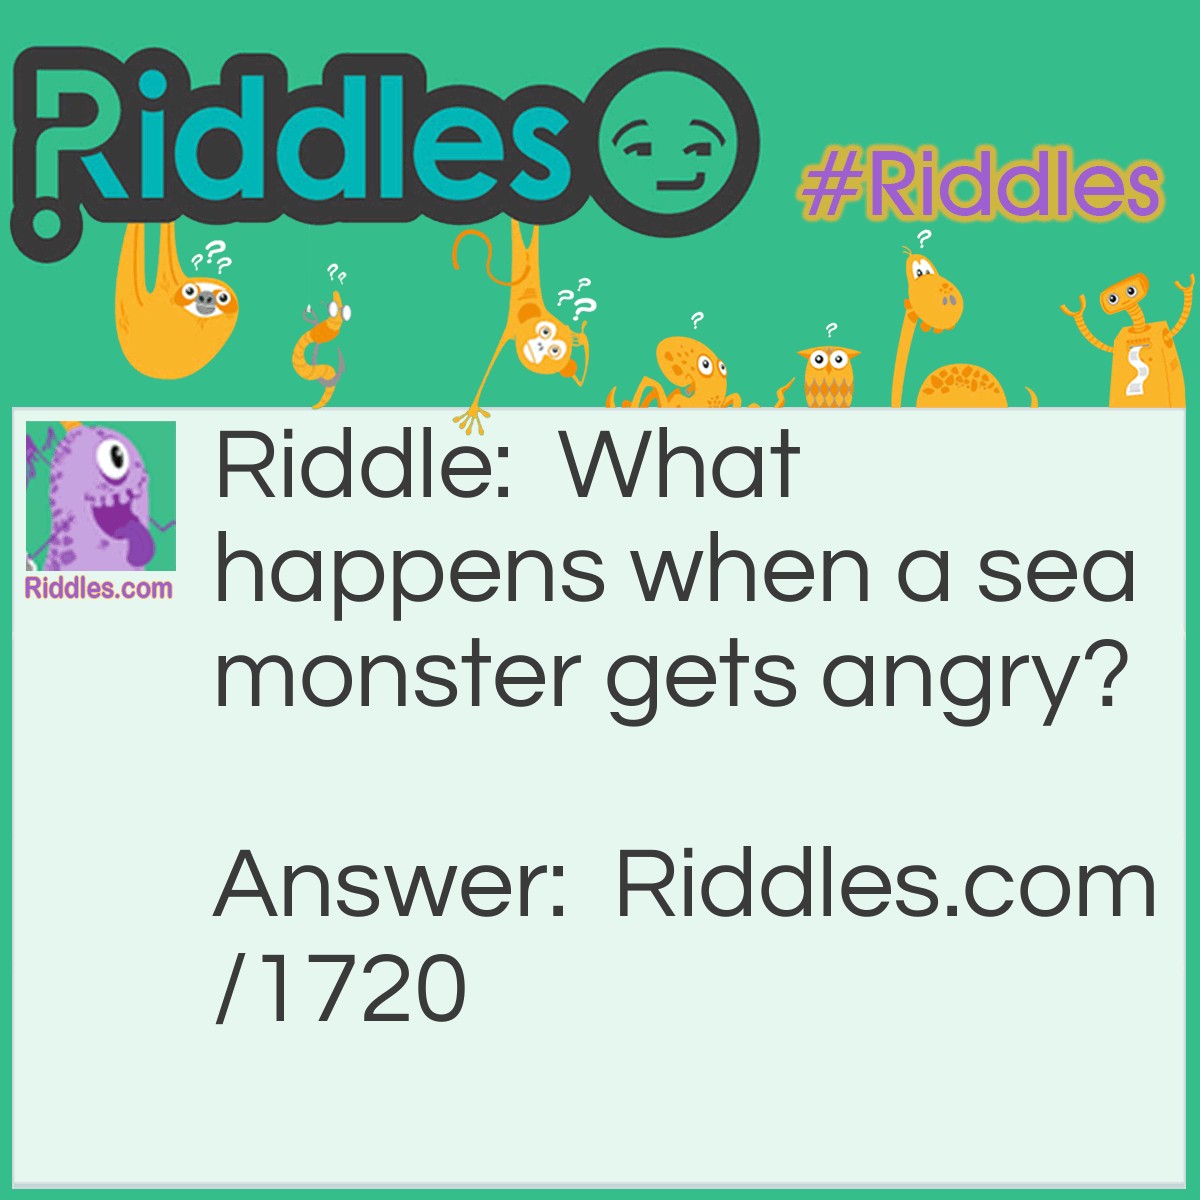 Riddle: What happens when a sea monster gets angry? Answer: It causes a comm-ocean.